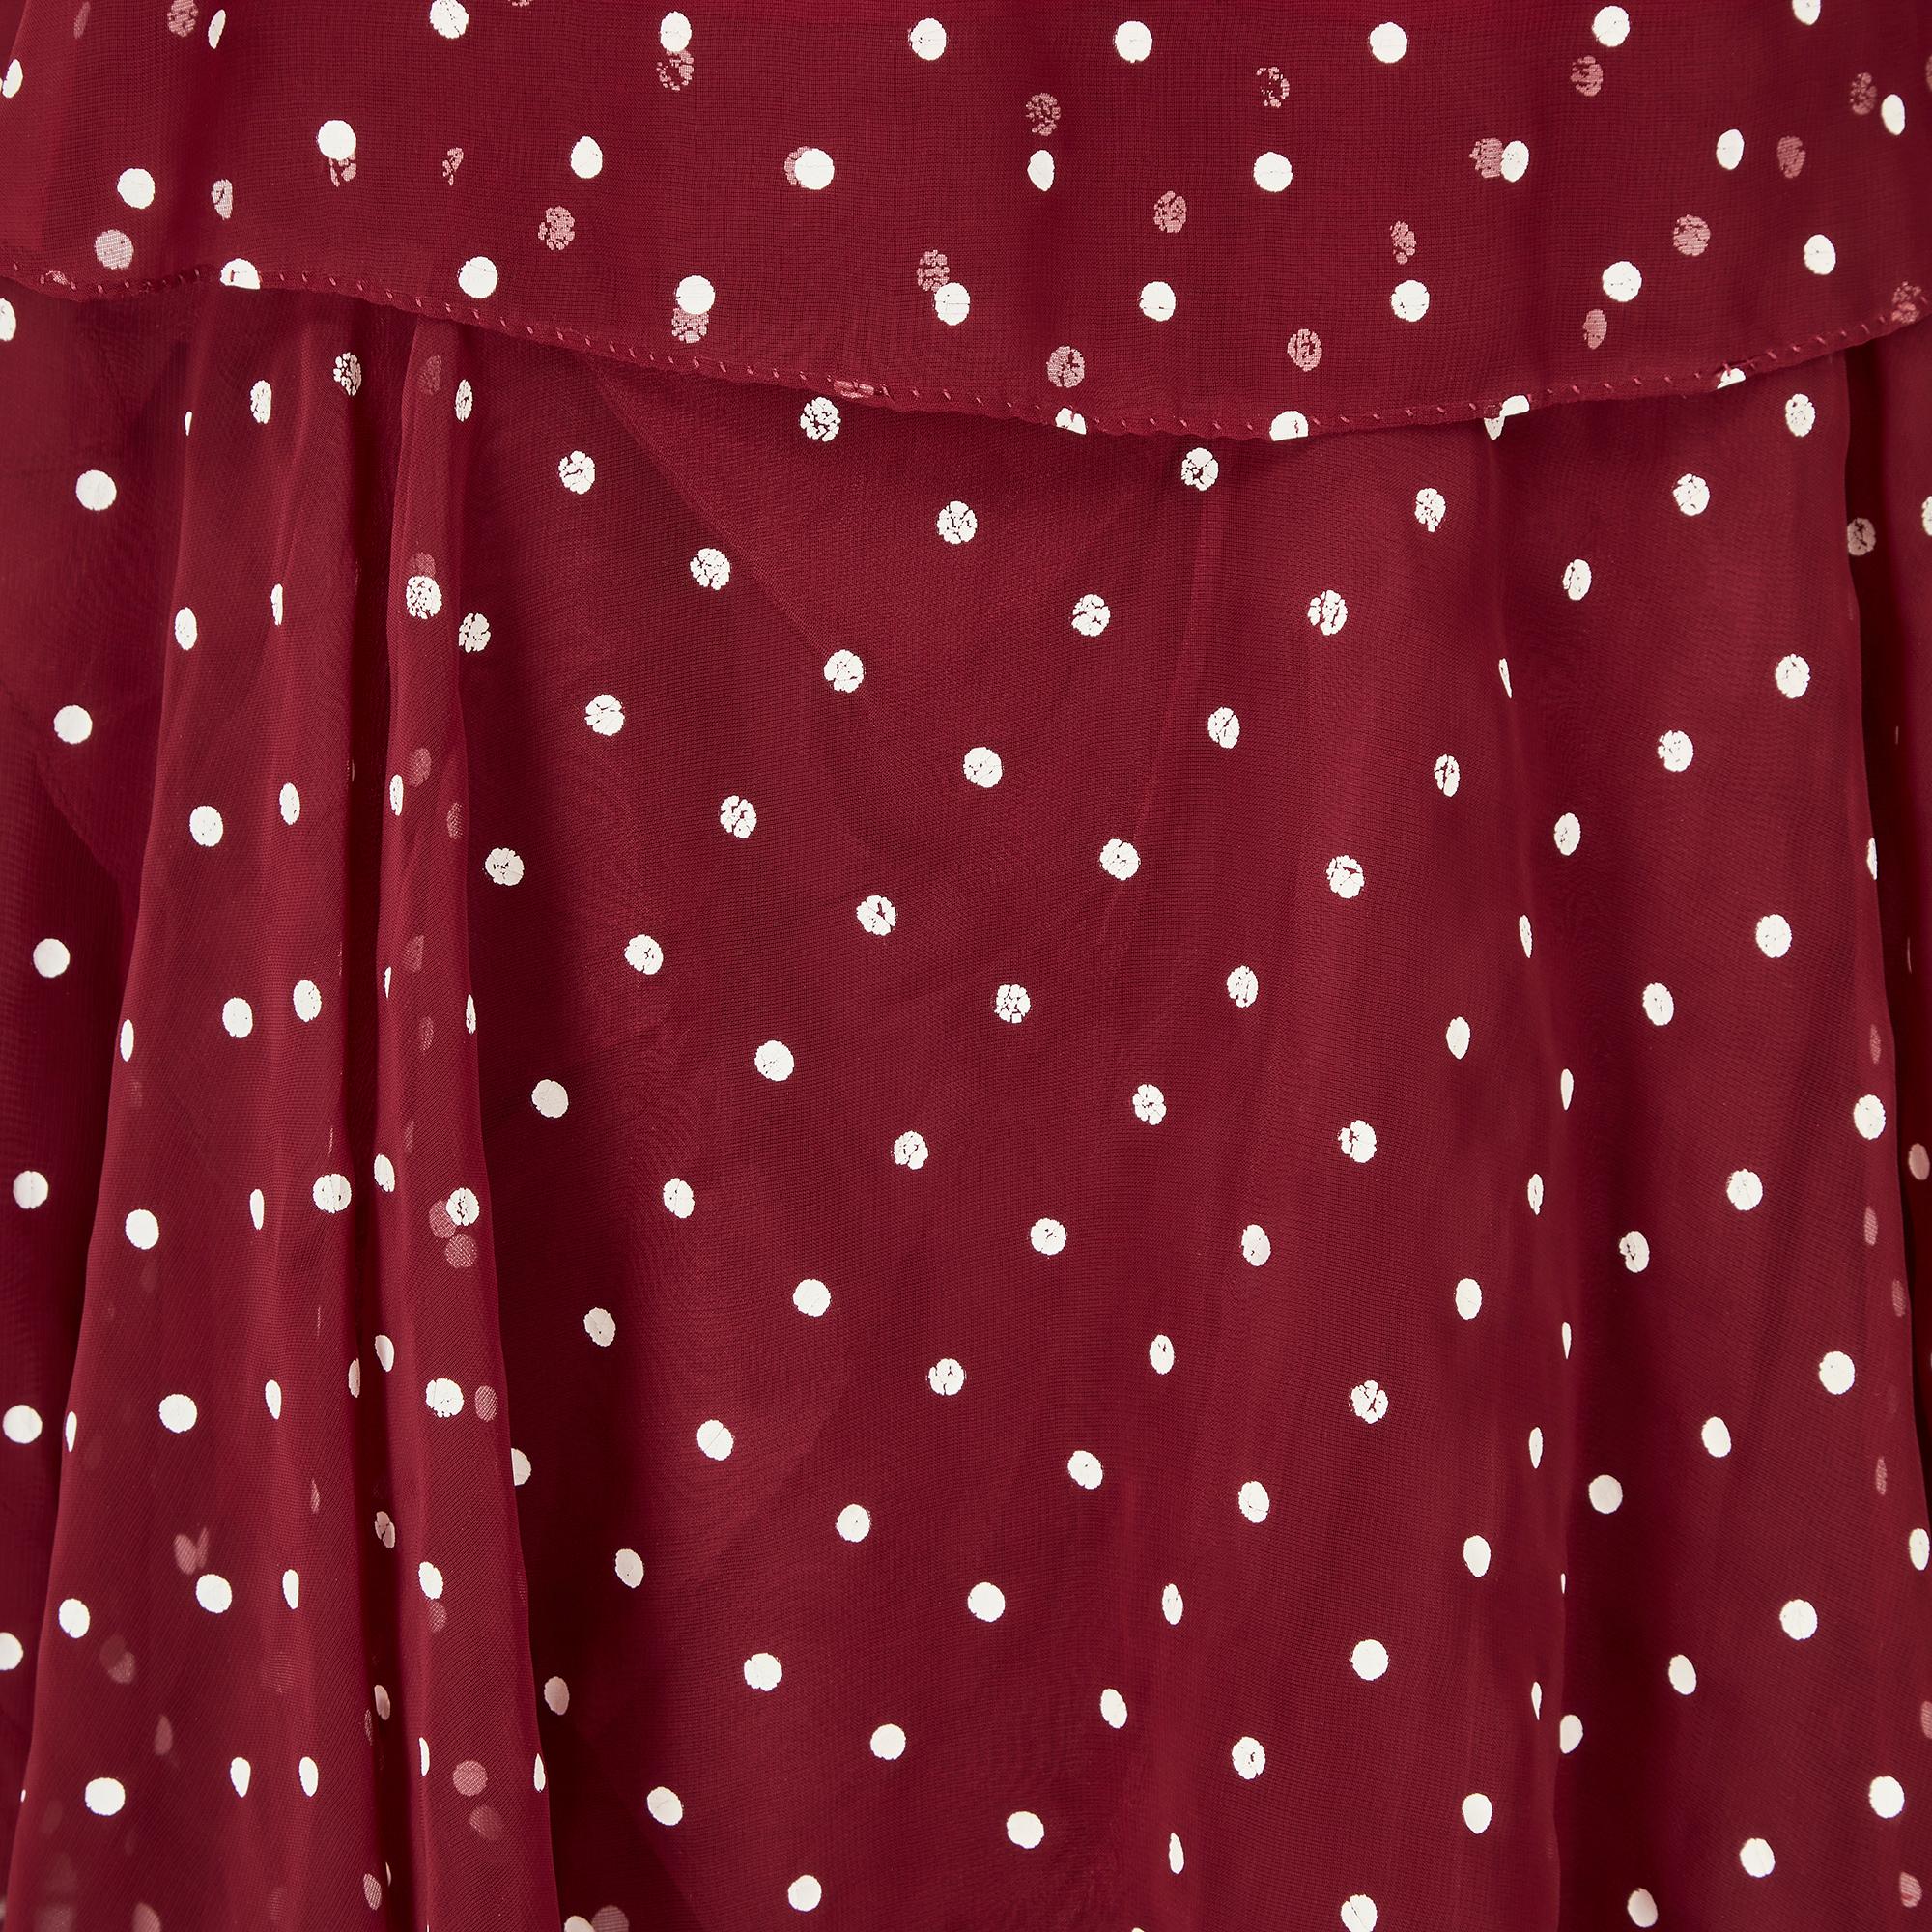 Women's 1970s Norman Berg Burgundy and White Polka Dot Tiered Dress For Sale